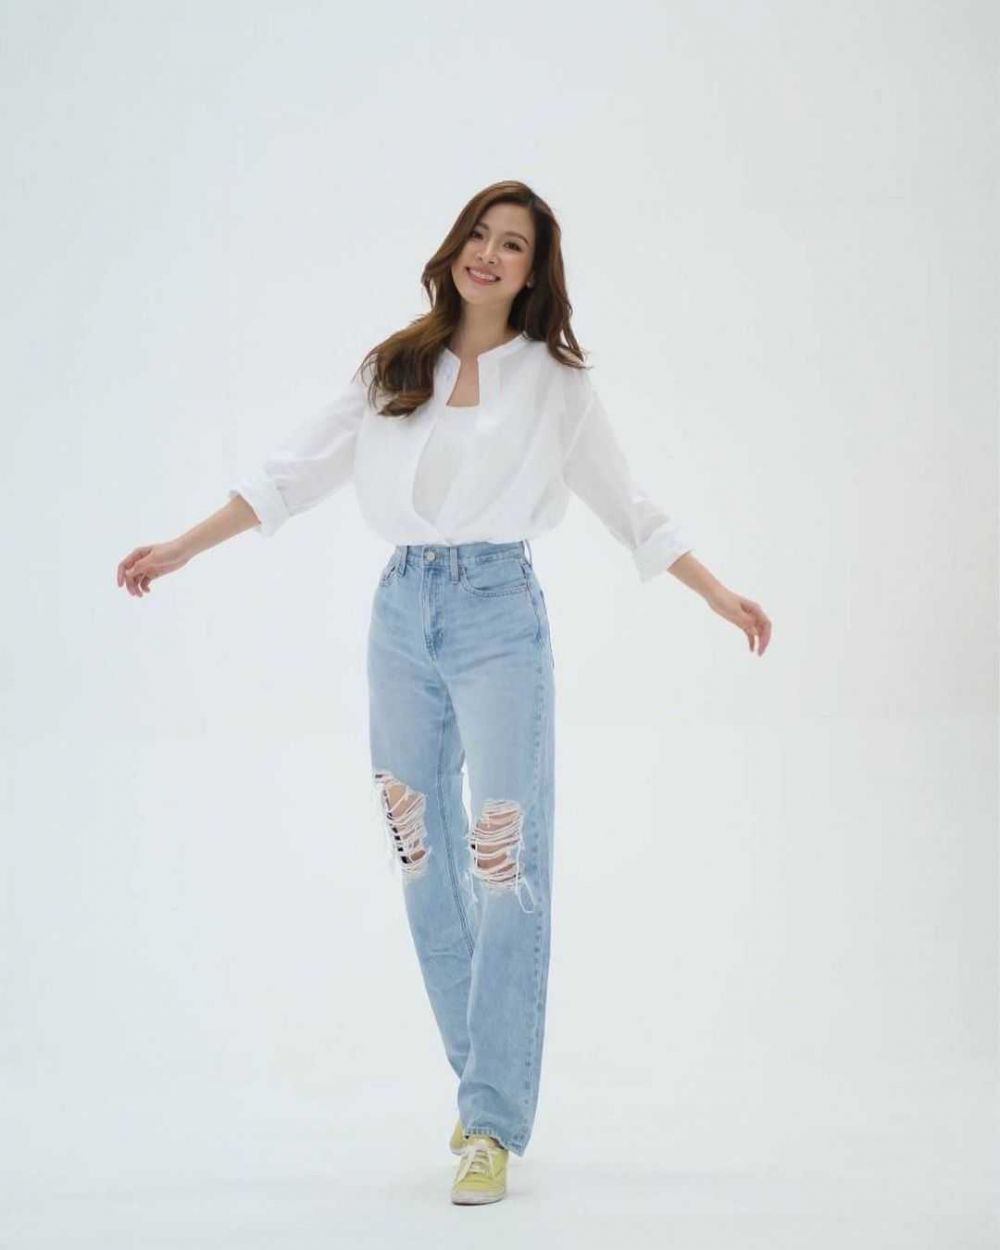 Dominated by Jeans, 10 Outfit Ideas Using Loose Pants by Thai Actresses